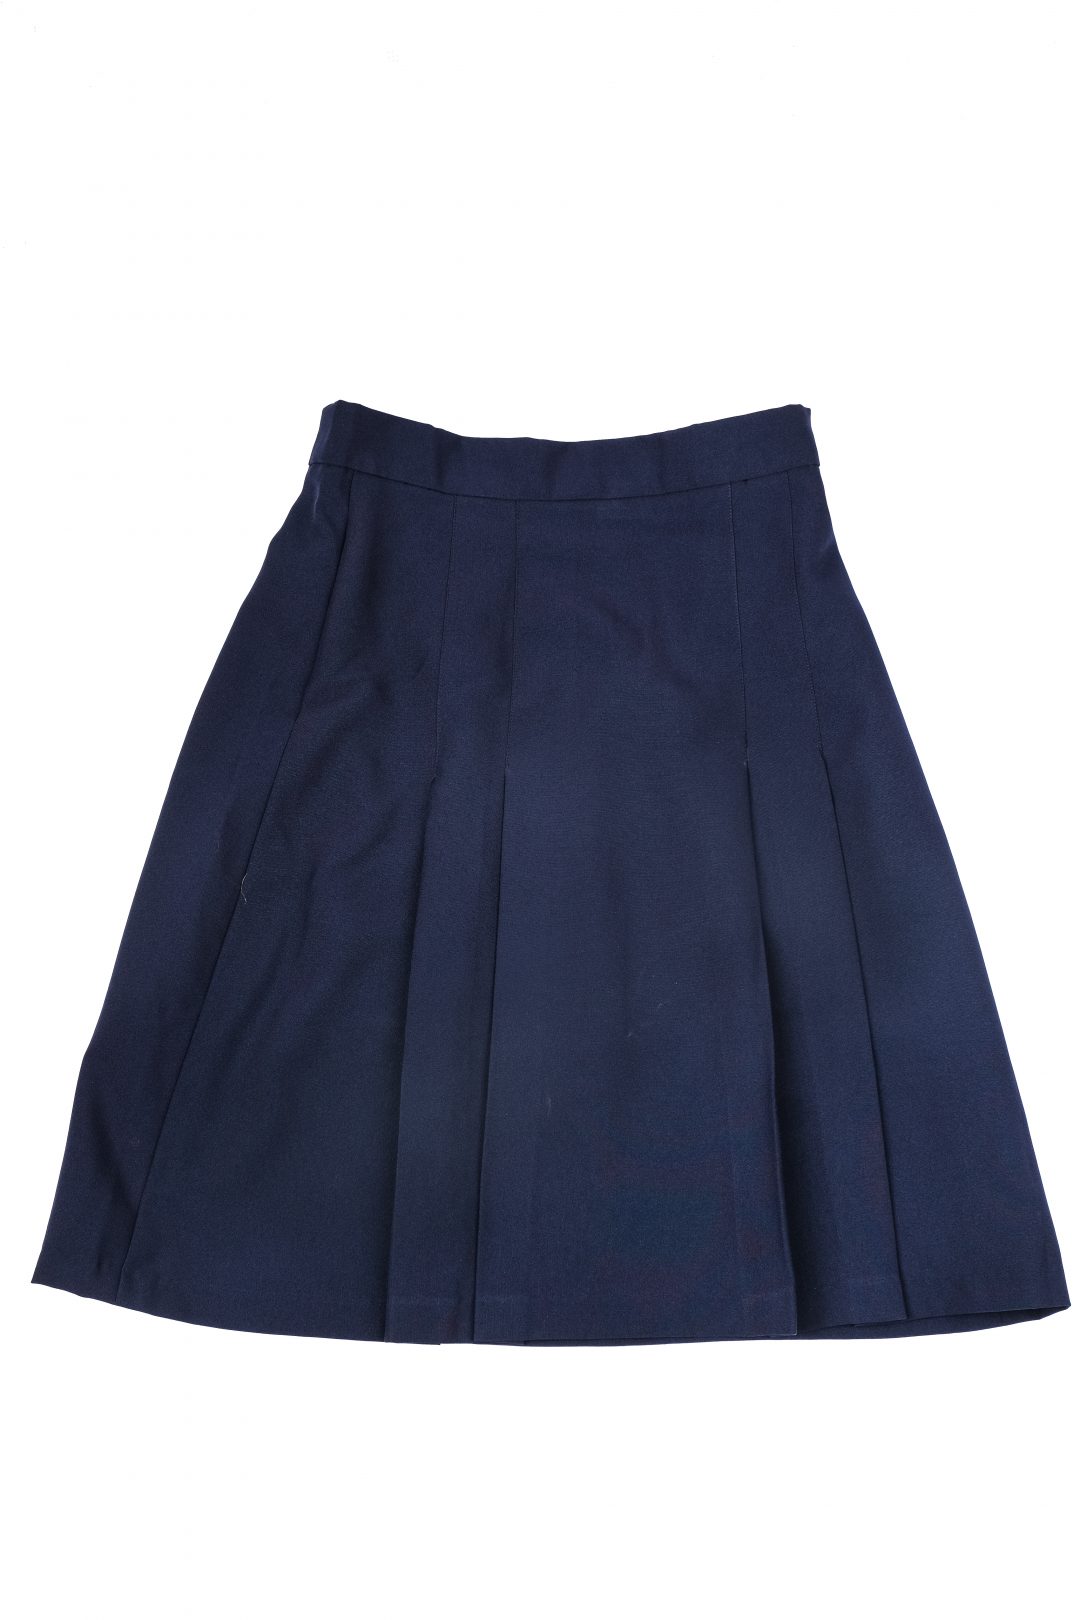 HILLCREST COLLEGE SKIRTS | Enbee Stores